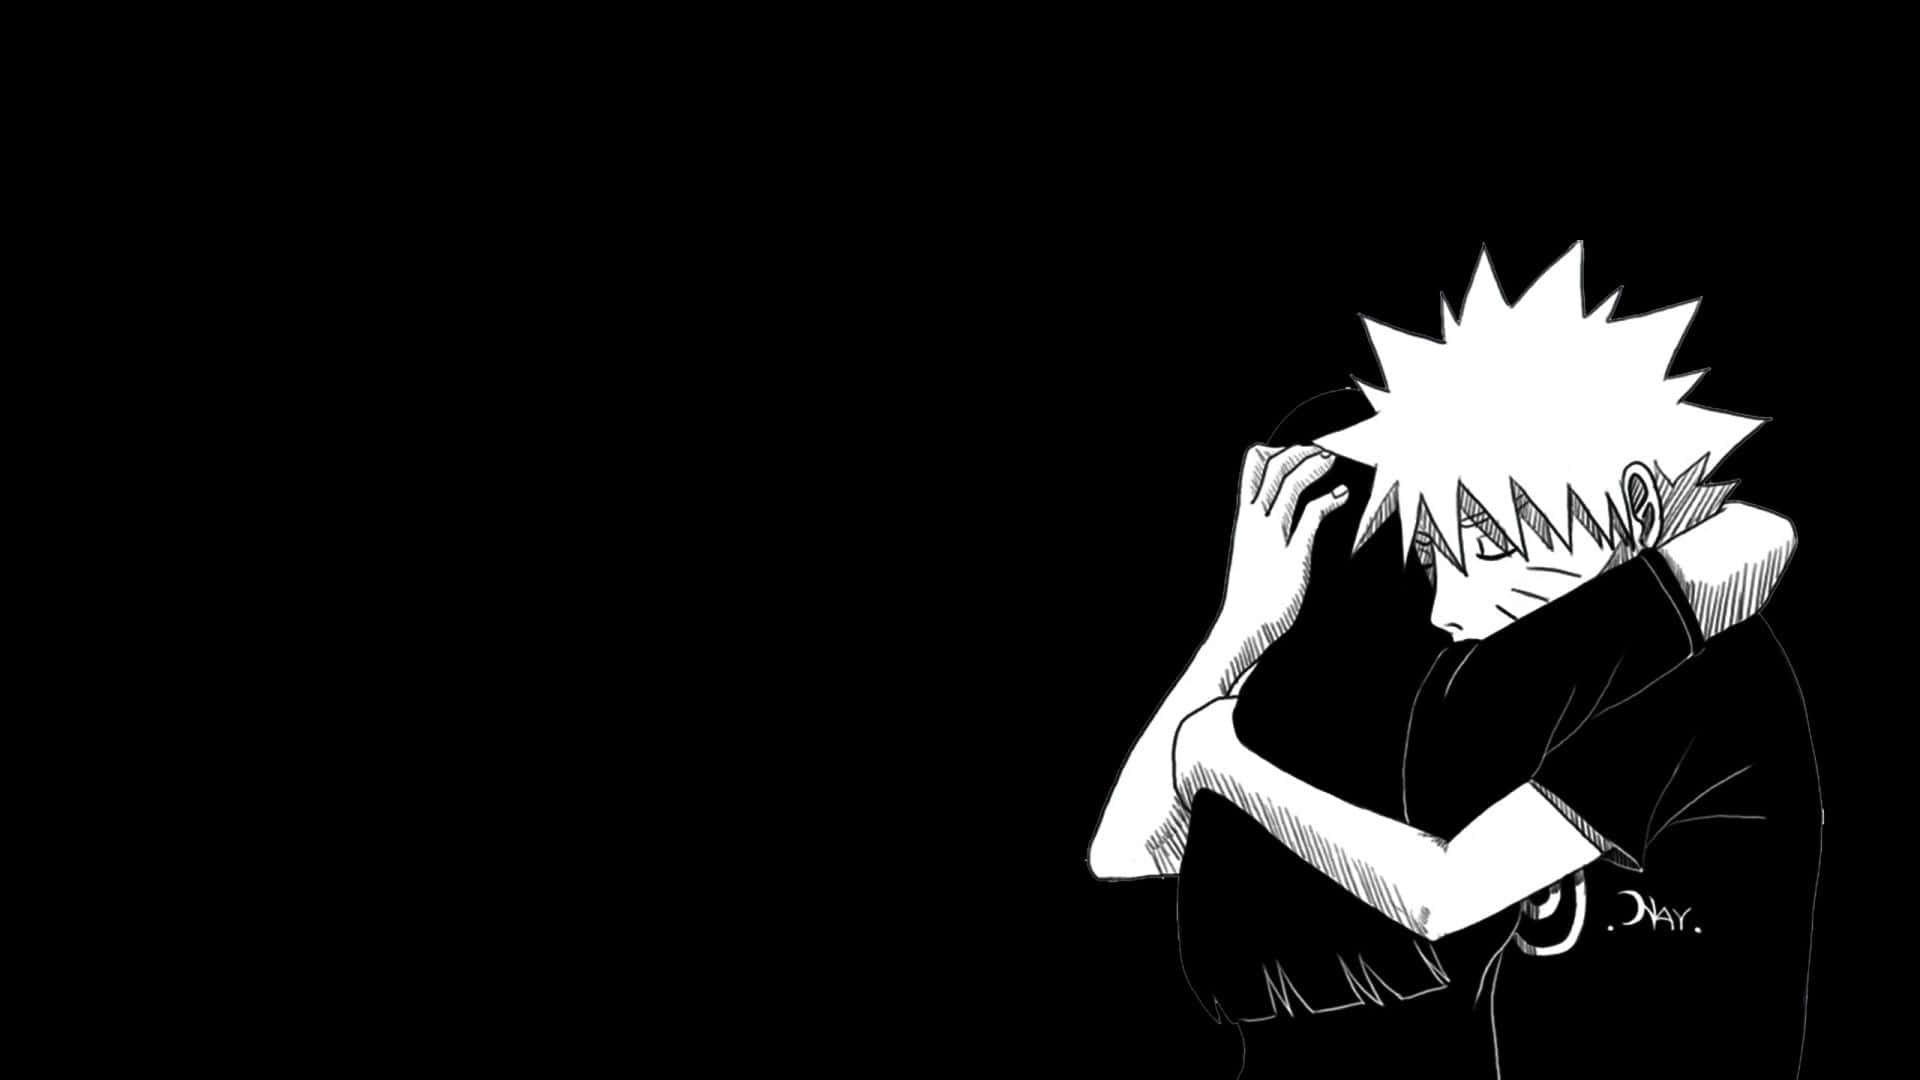 "Believe in yourself and be the hero of your destiny." - Naruto Uzumaki